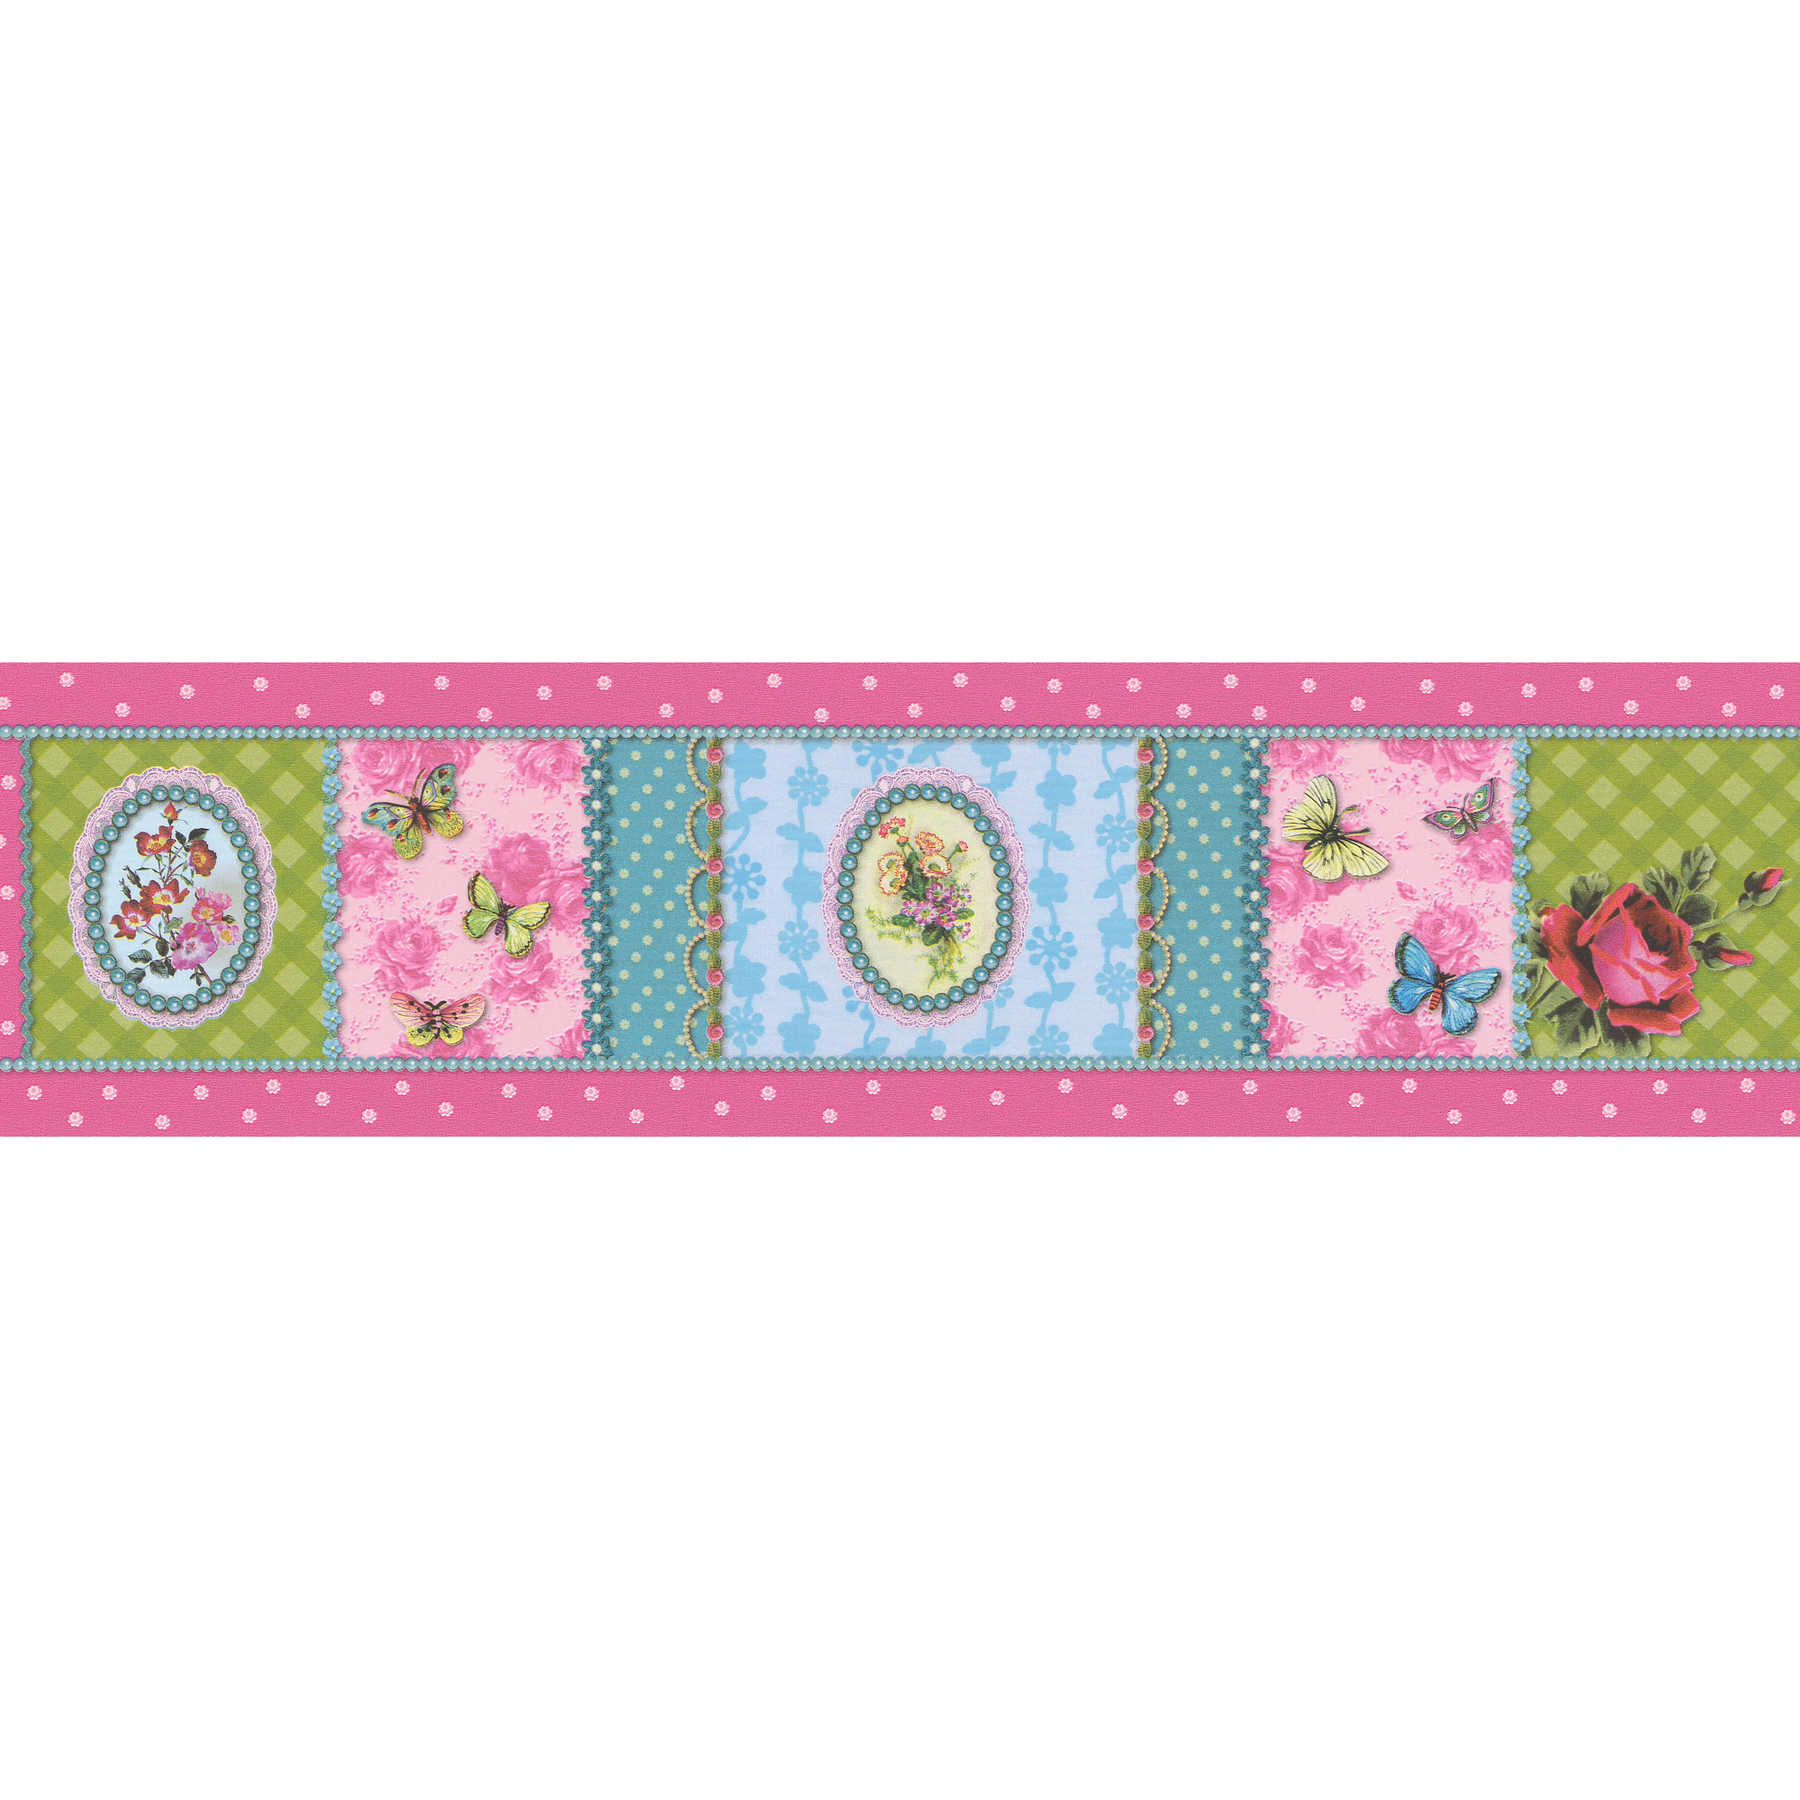 Wallpaper border OILILY pattern dots & flowers - multicoloured
